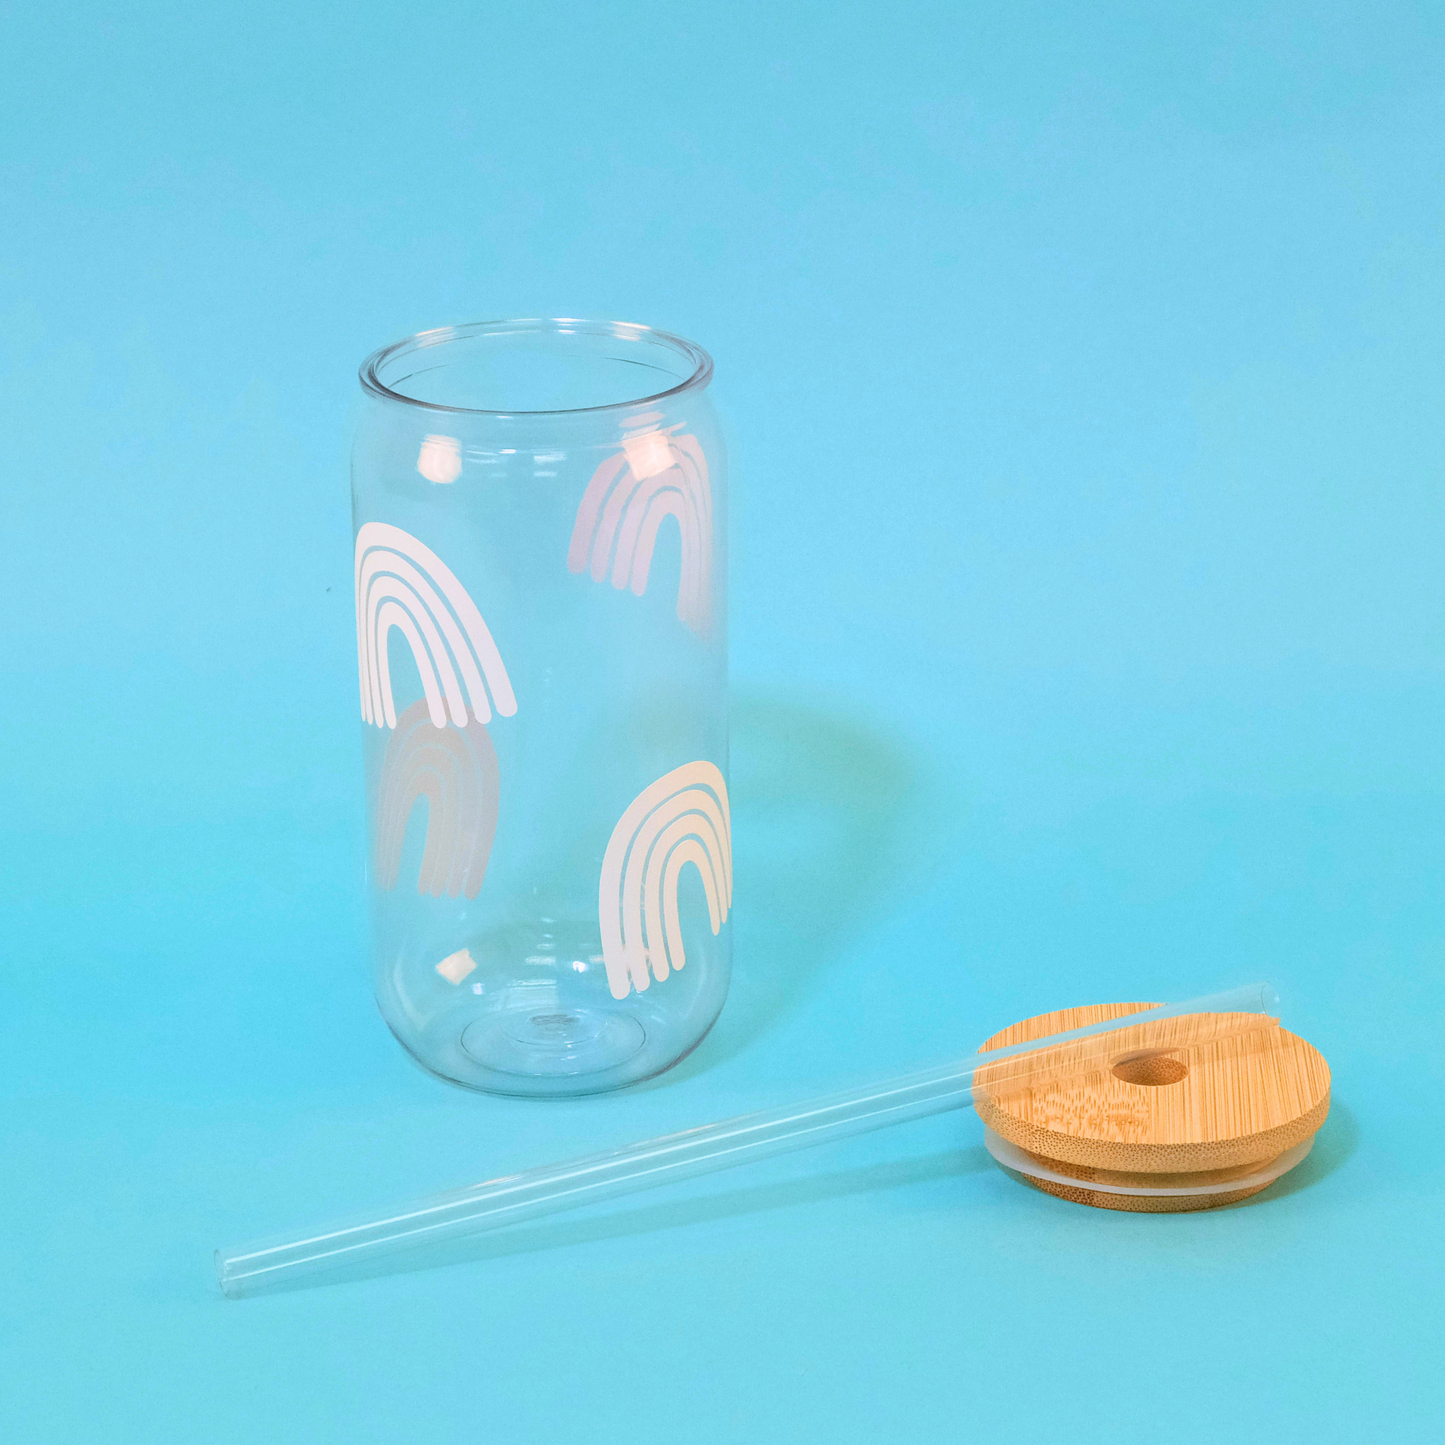 Boho Rainbow Tumbler with Bamboo lid and Plastic Straw laying beside